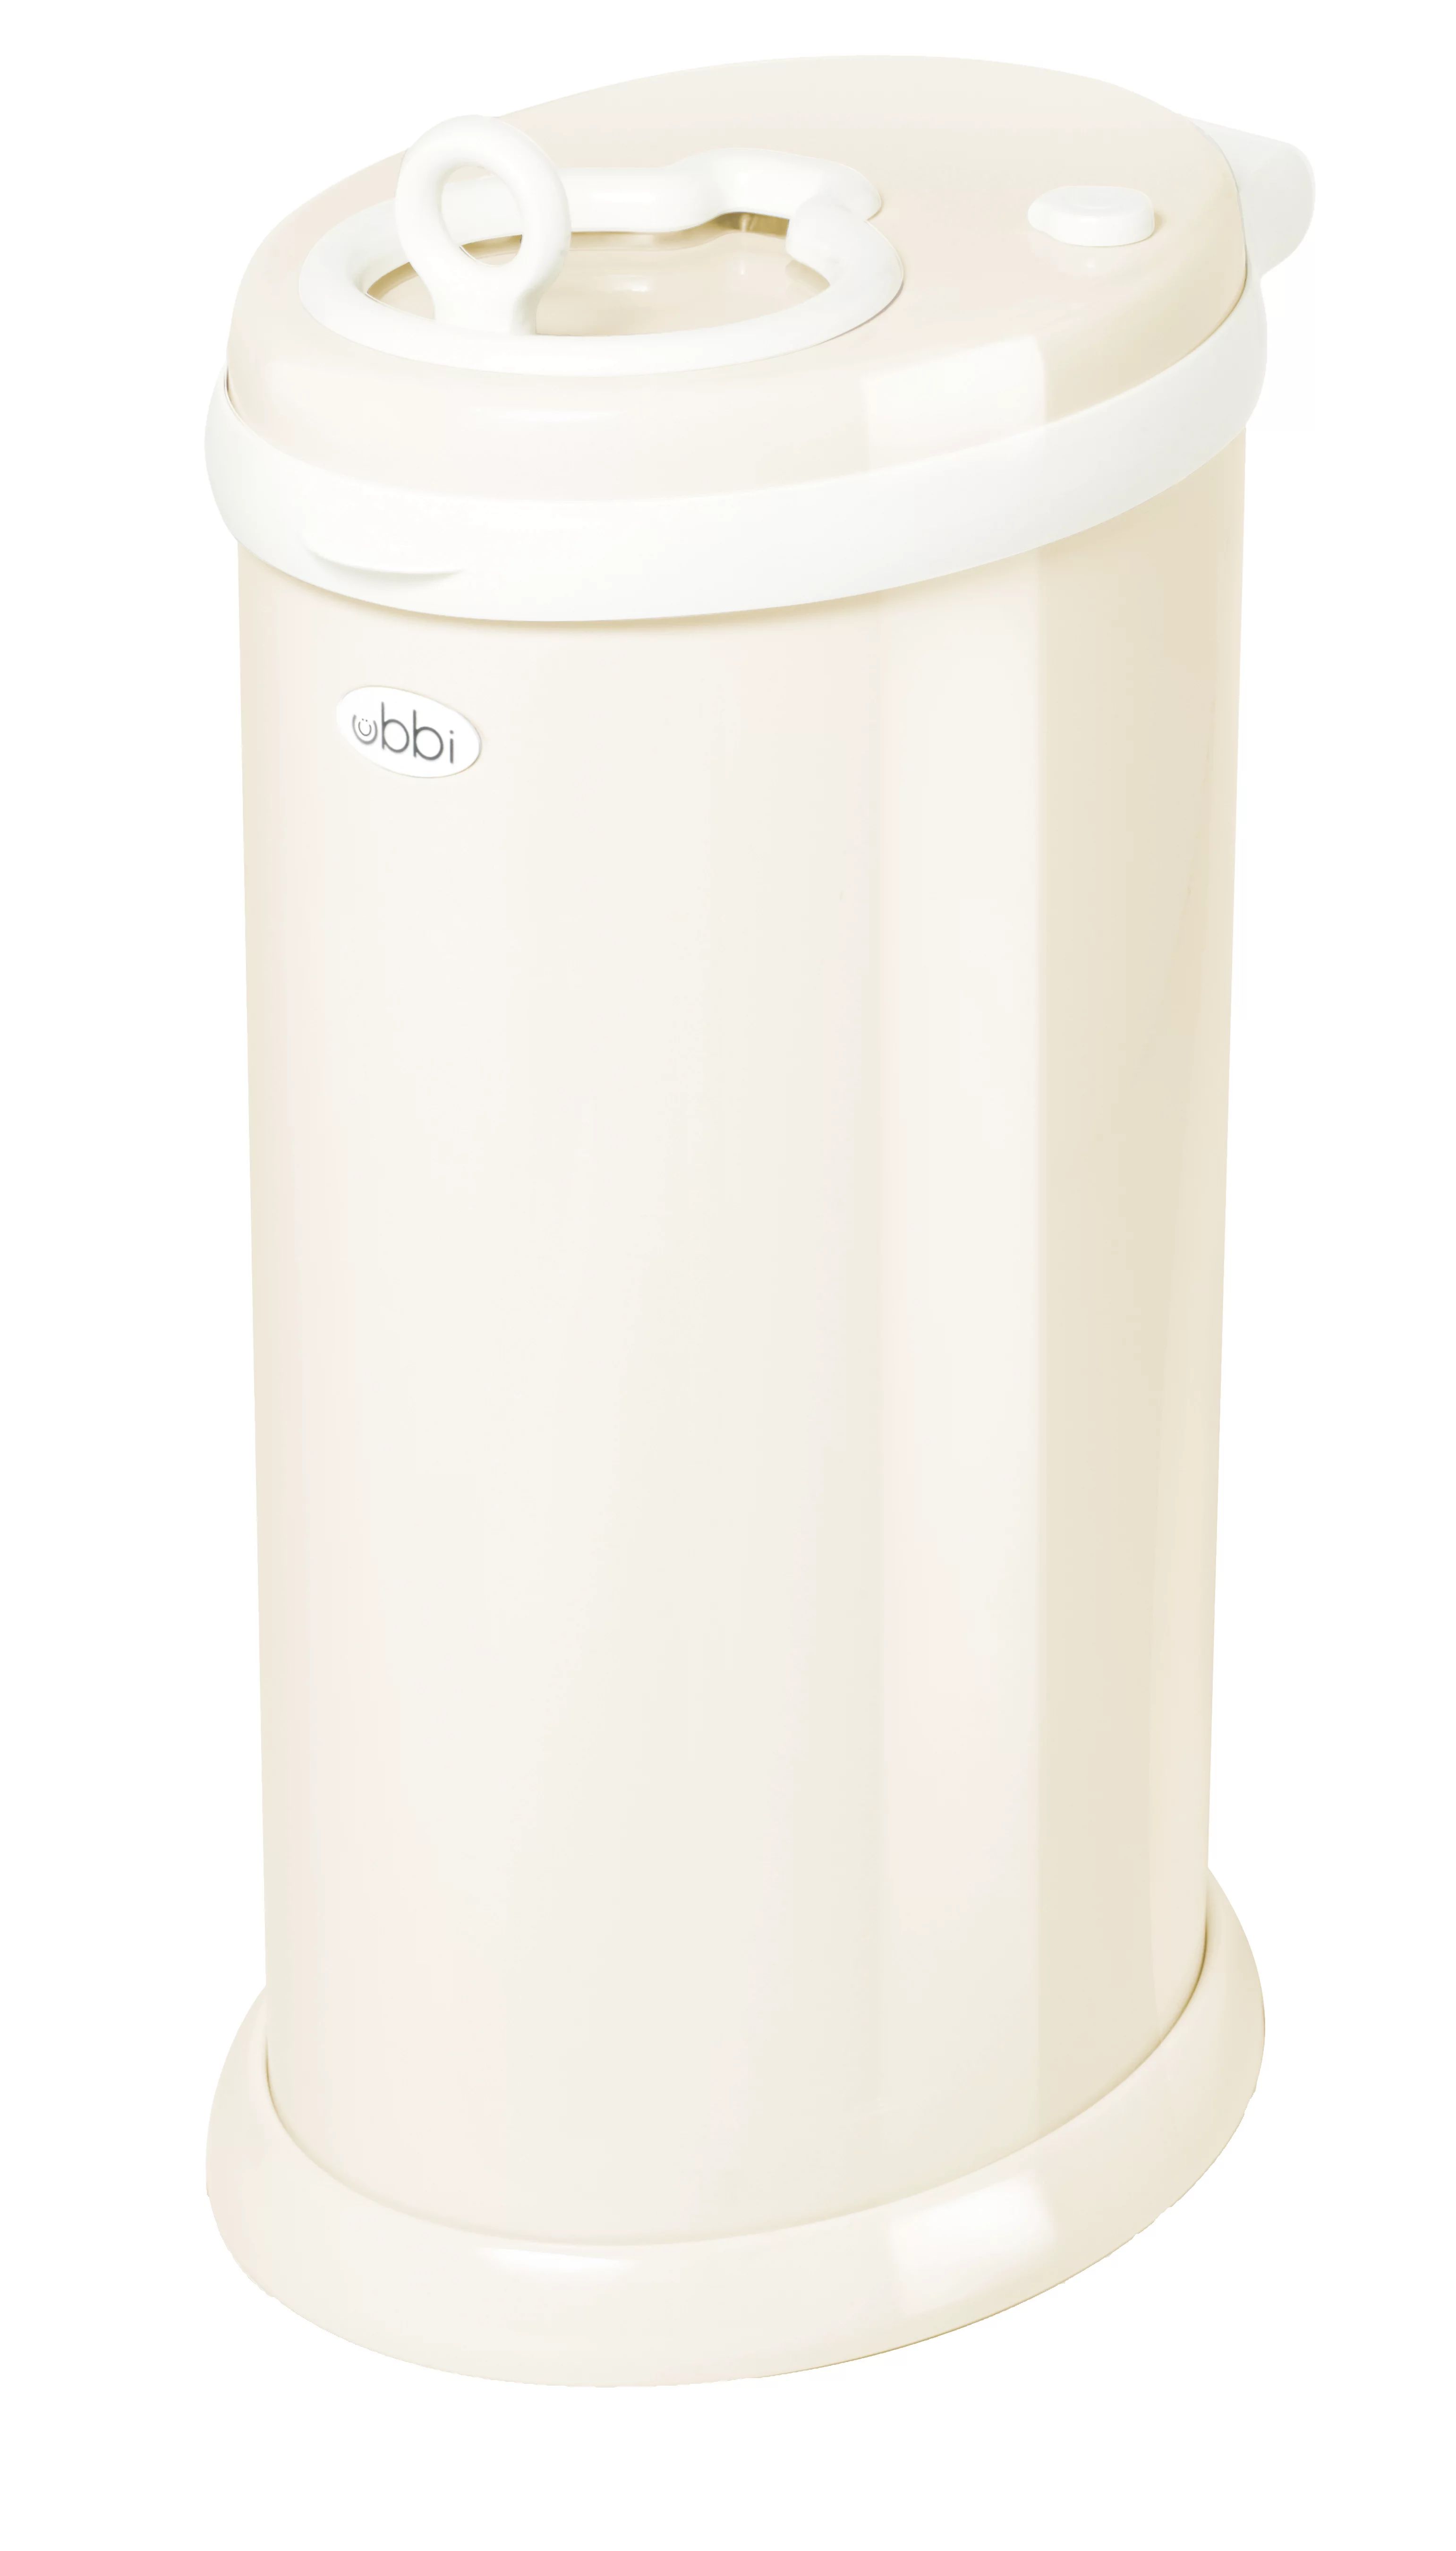 Ubbi Steel Diaper Pail, Ivory Color, Odor Locking, No Special Bag Required | Walmart (US)